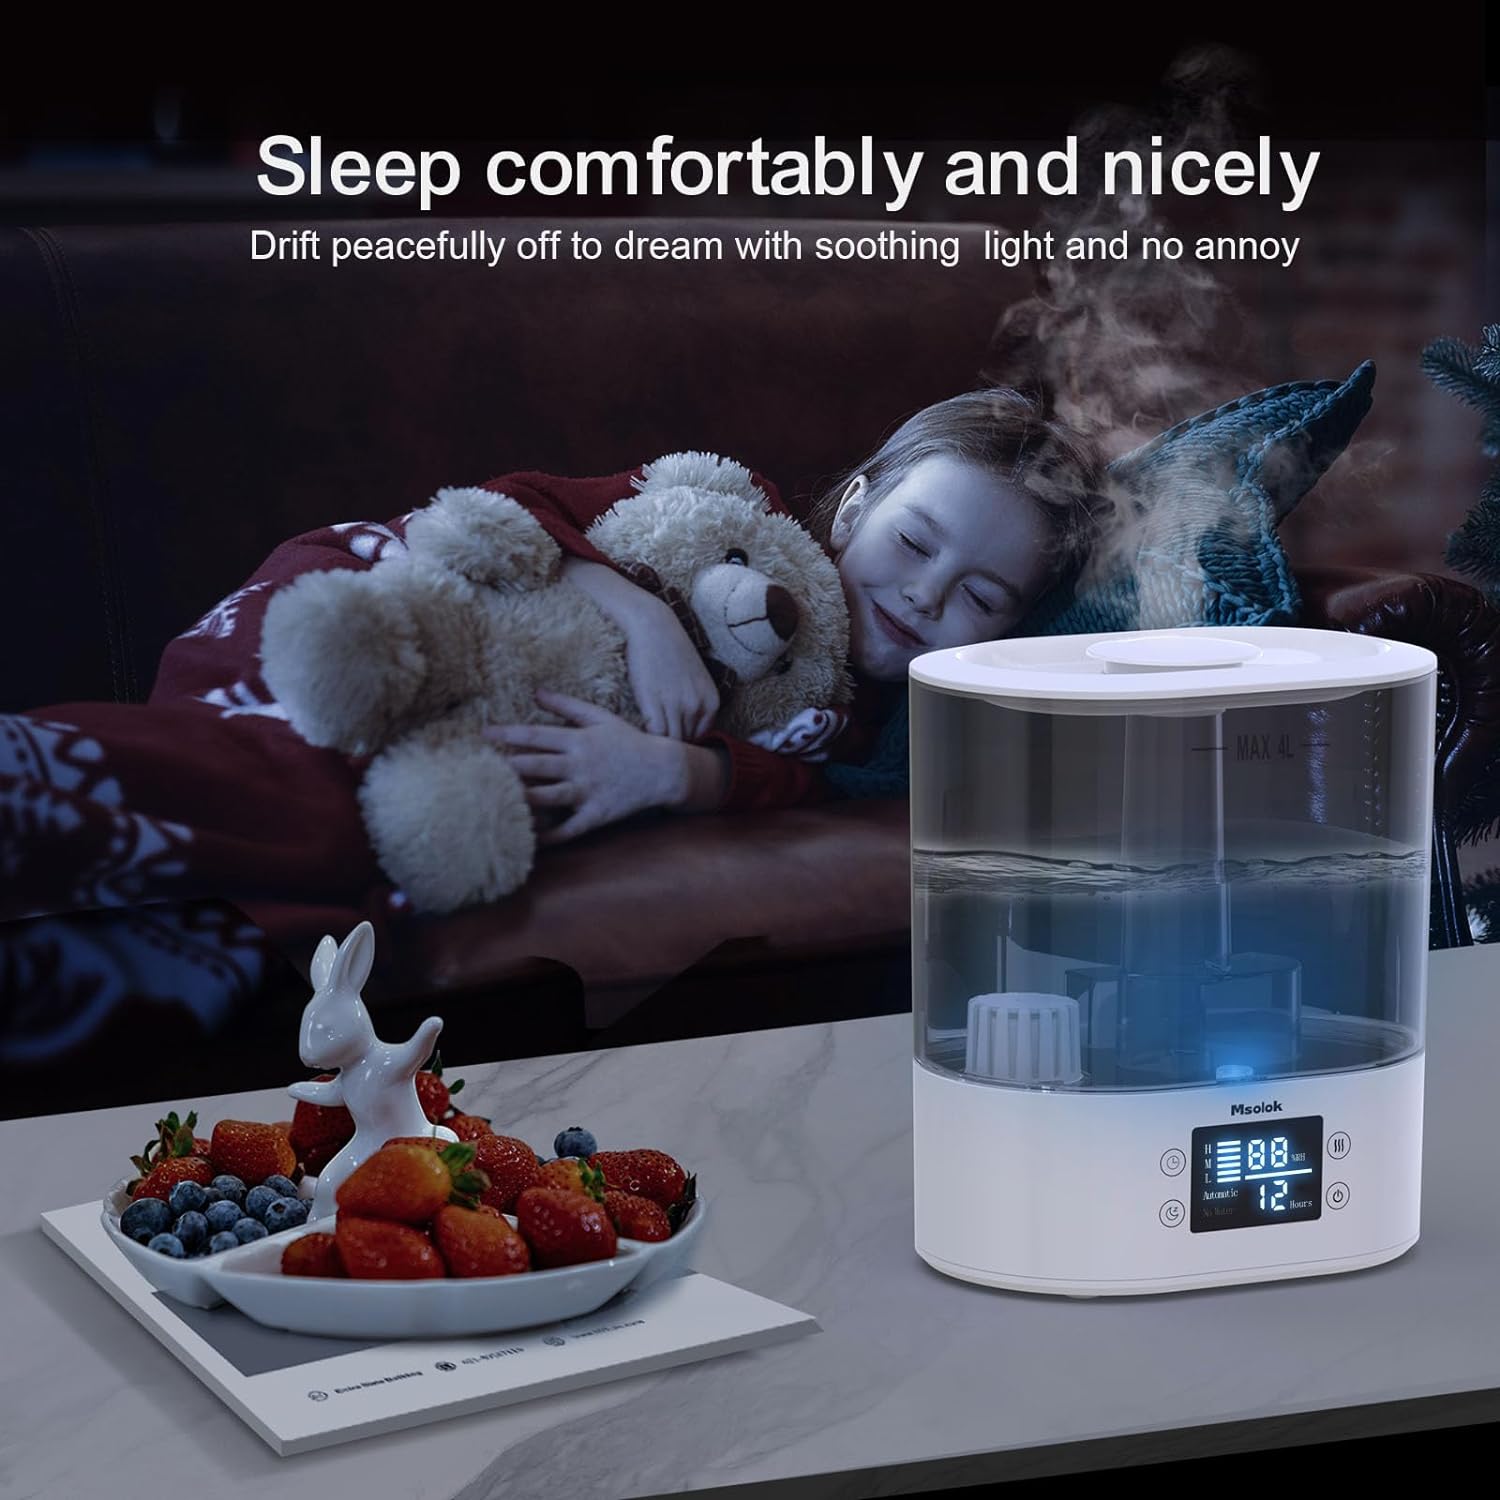 Msolok Humidifiers for Bedroom and Home  Baby - 4L Cool Mist Air Humidifiers for Plants, 26db Quiet Top Fill Air Humidifier Lasts Up to 40 Hours, Auto Shut-Off, Super Easy to Fill and Clean